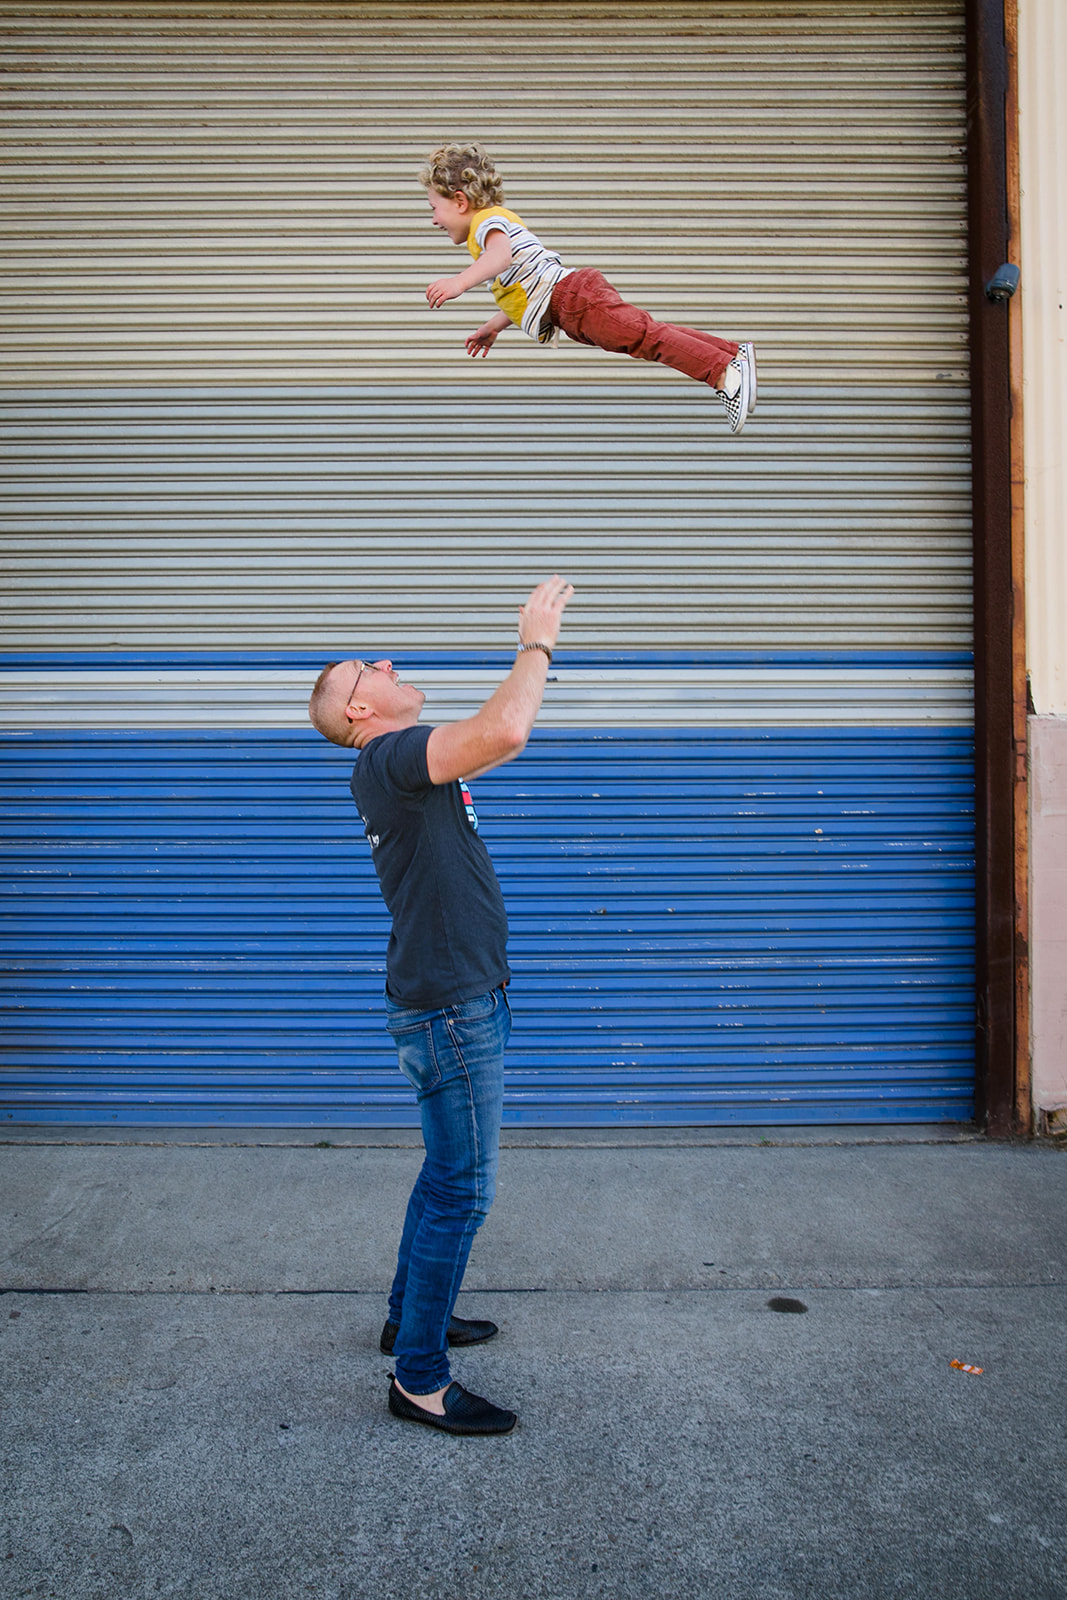 photo of father throwing toddler son in the air